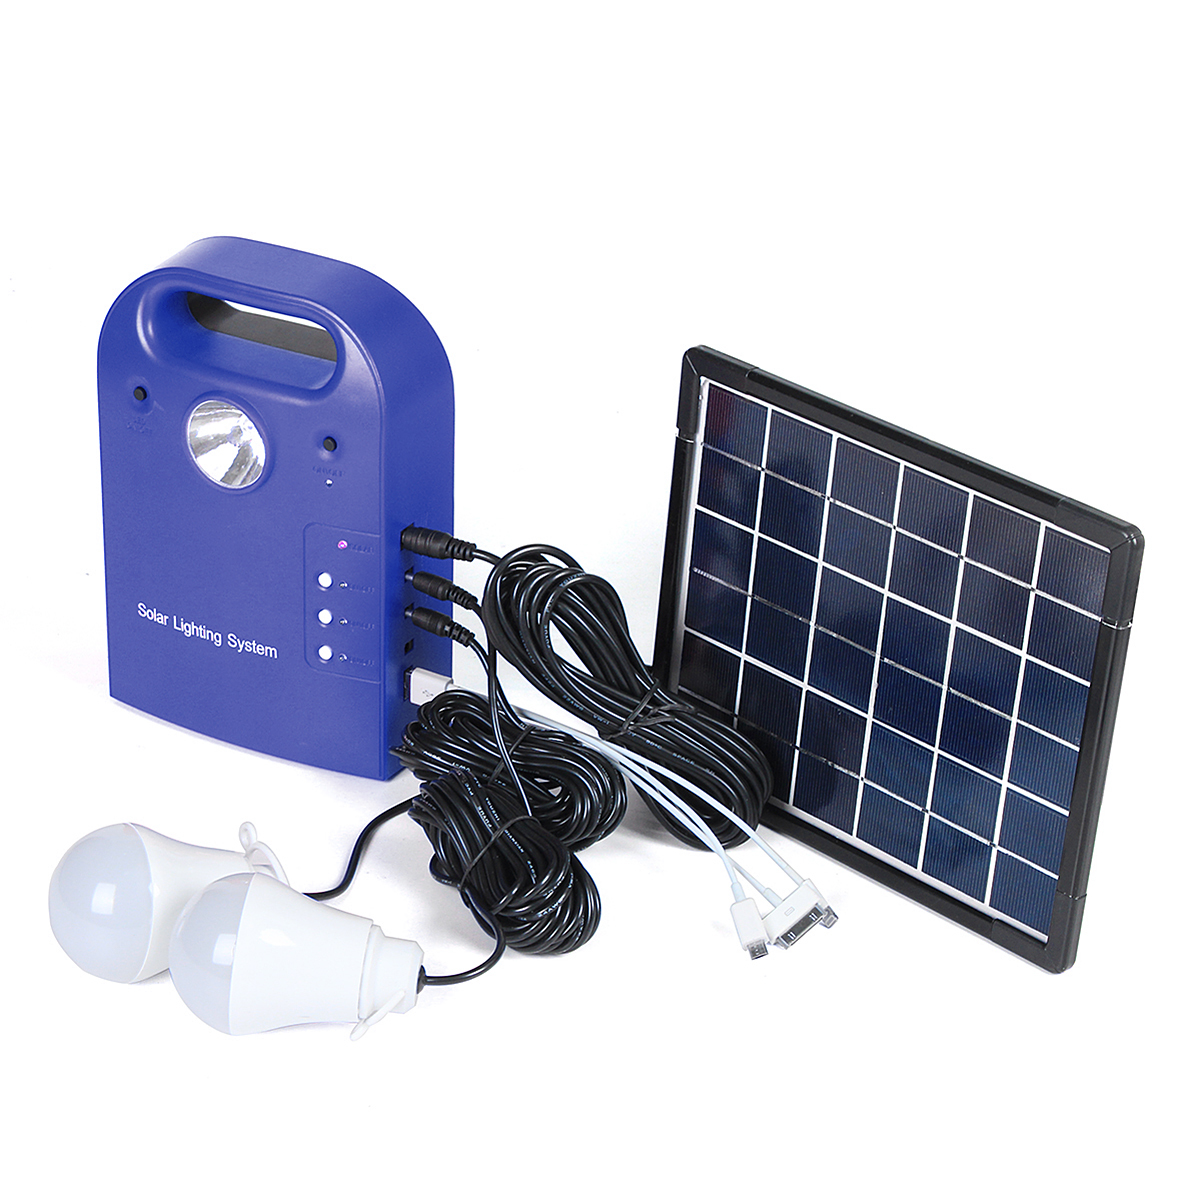 28Wh Portable Small DC Solar Panels Charging Generator Power Generation System With LED Bulb 2